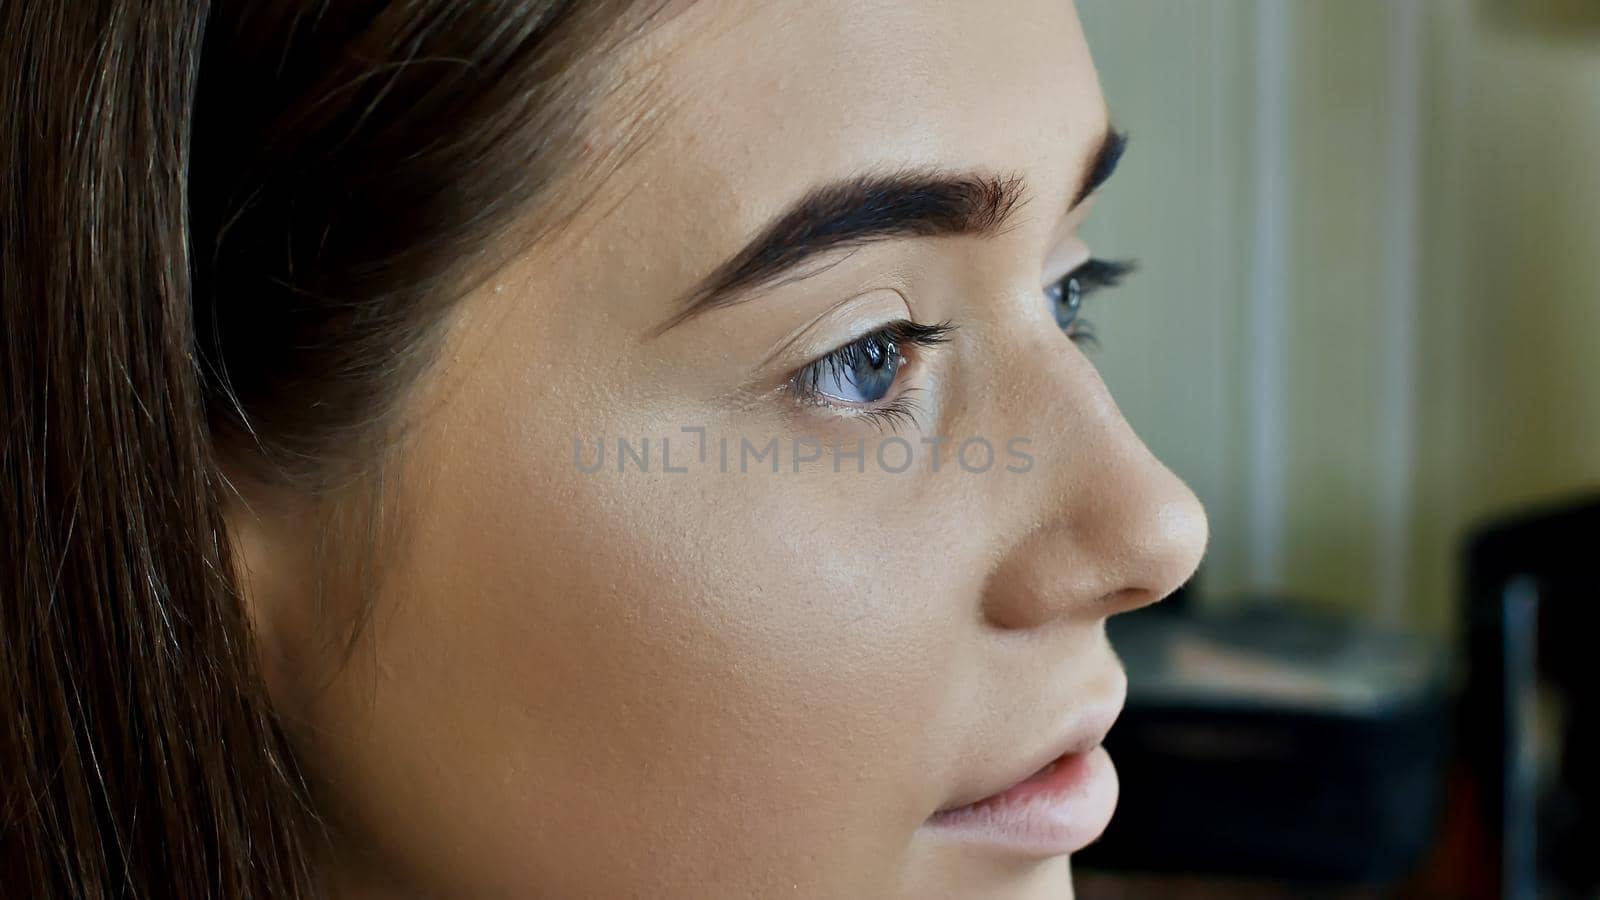 Eyebrows Care. Closeup Of Woman Beautiful Blue Eye, Perfect Shaped Brow, Long Eyelashes With Professional Makeup And Brow Gel Brush. Young Female Model Shaping Brown Eyebrows. High Resolution Image.